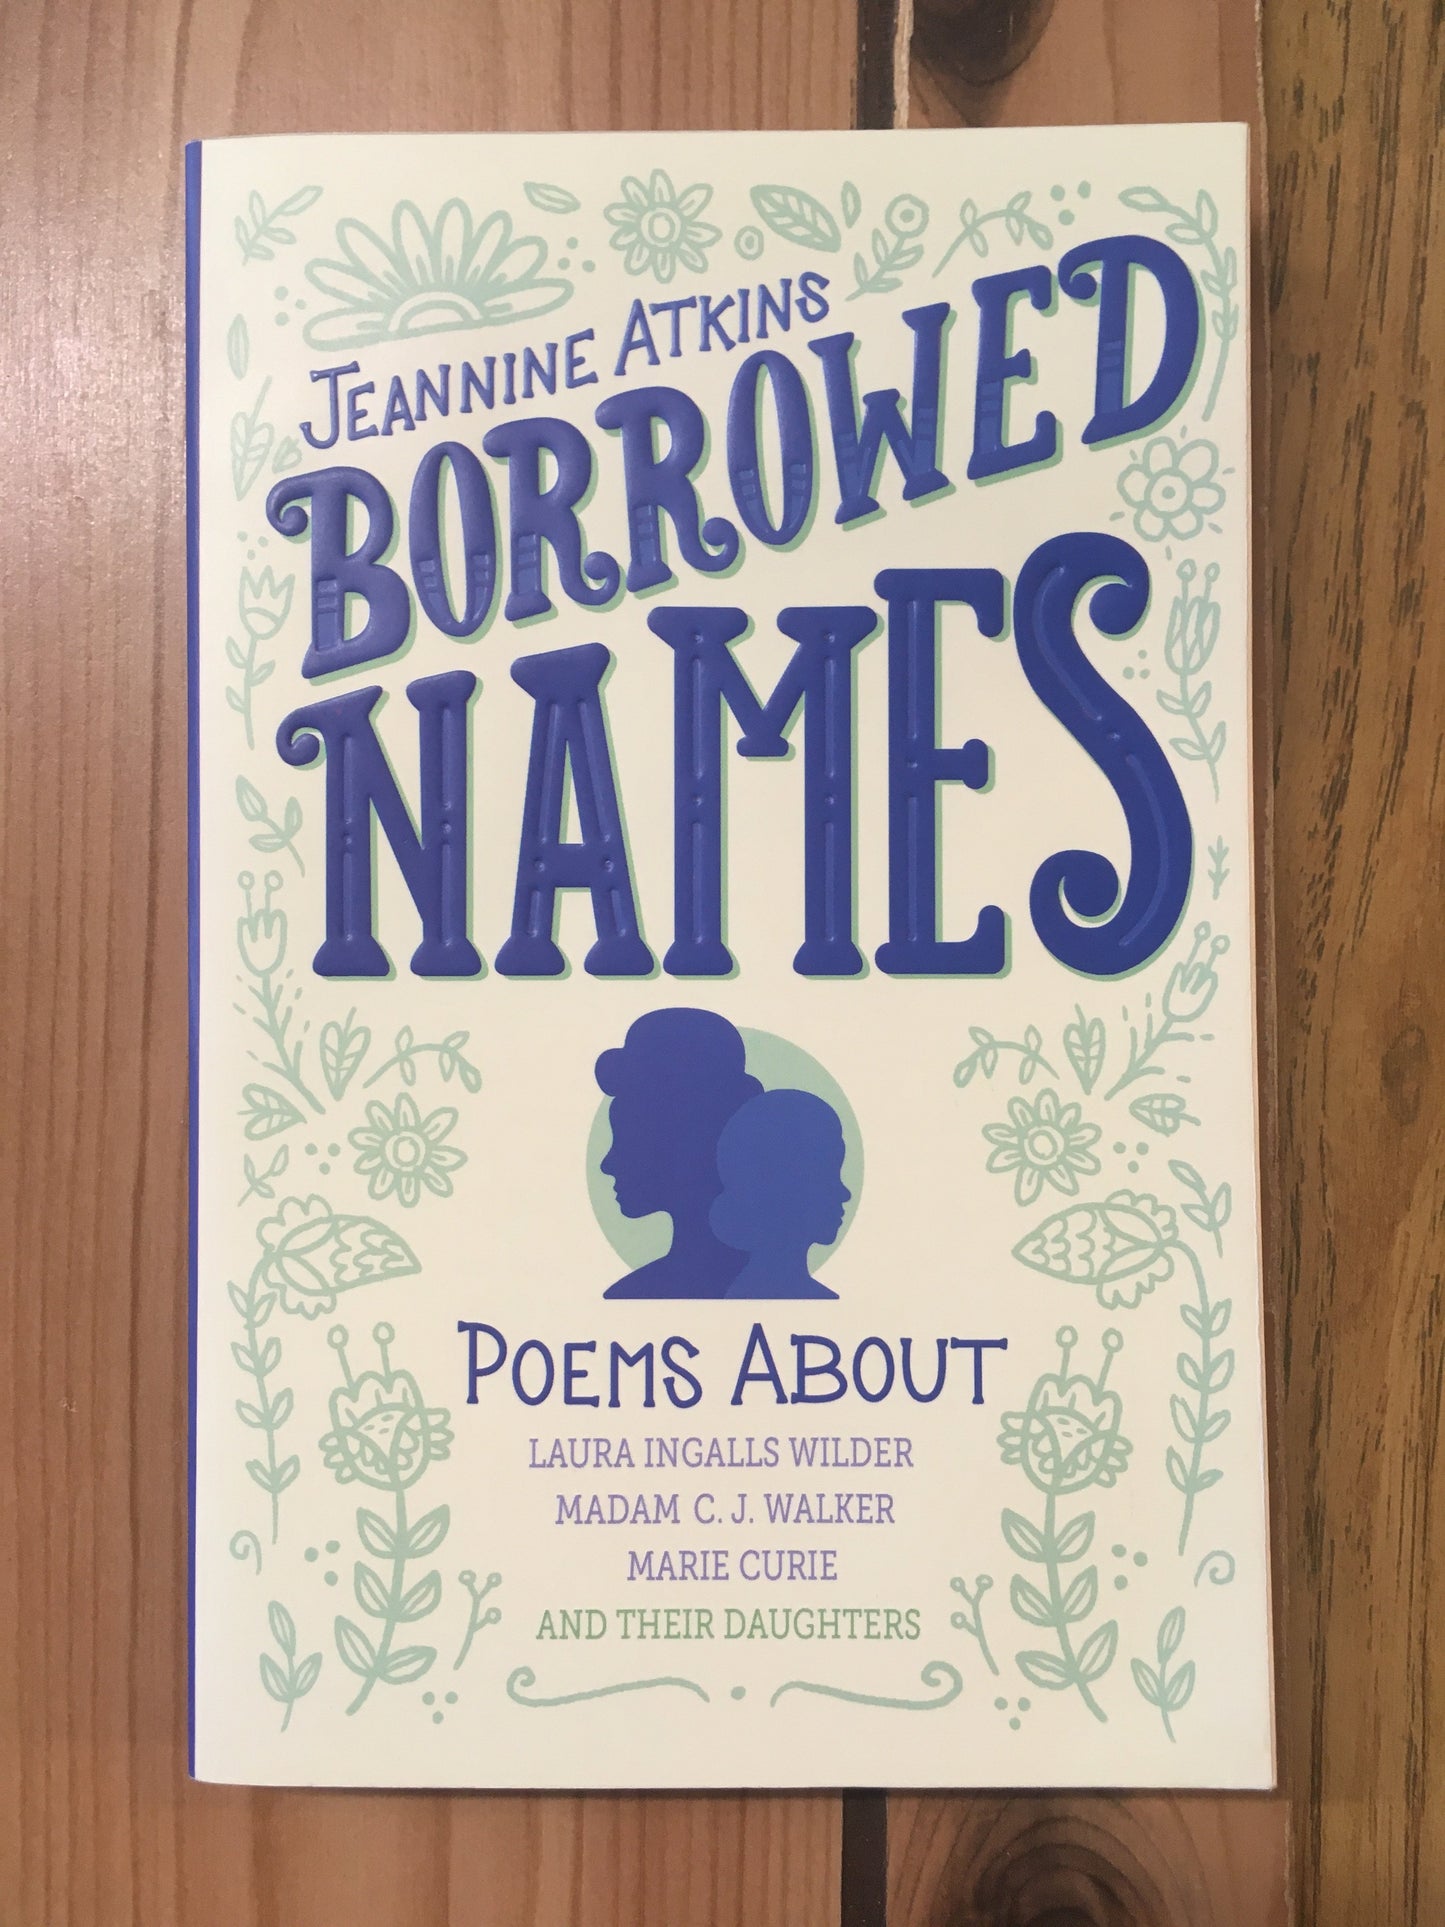 Borrowed Names: Poems About Laura Ingalls Wilder, Madam C. J. Walker, Marie Curie, and Their Daughters